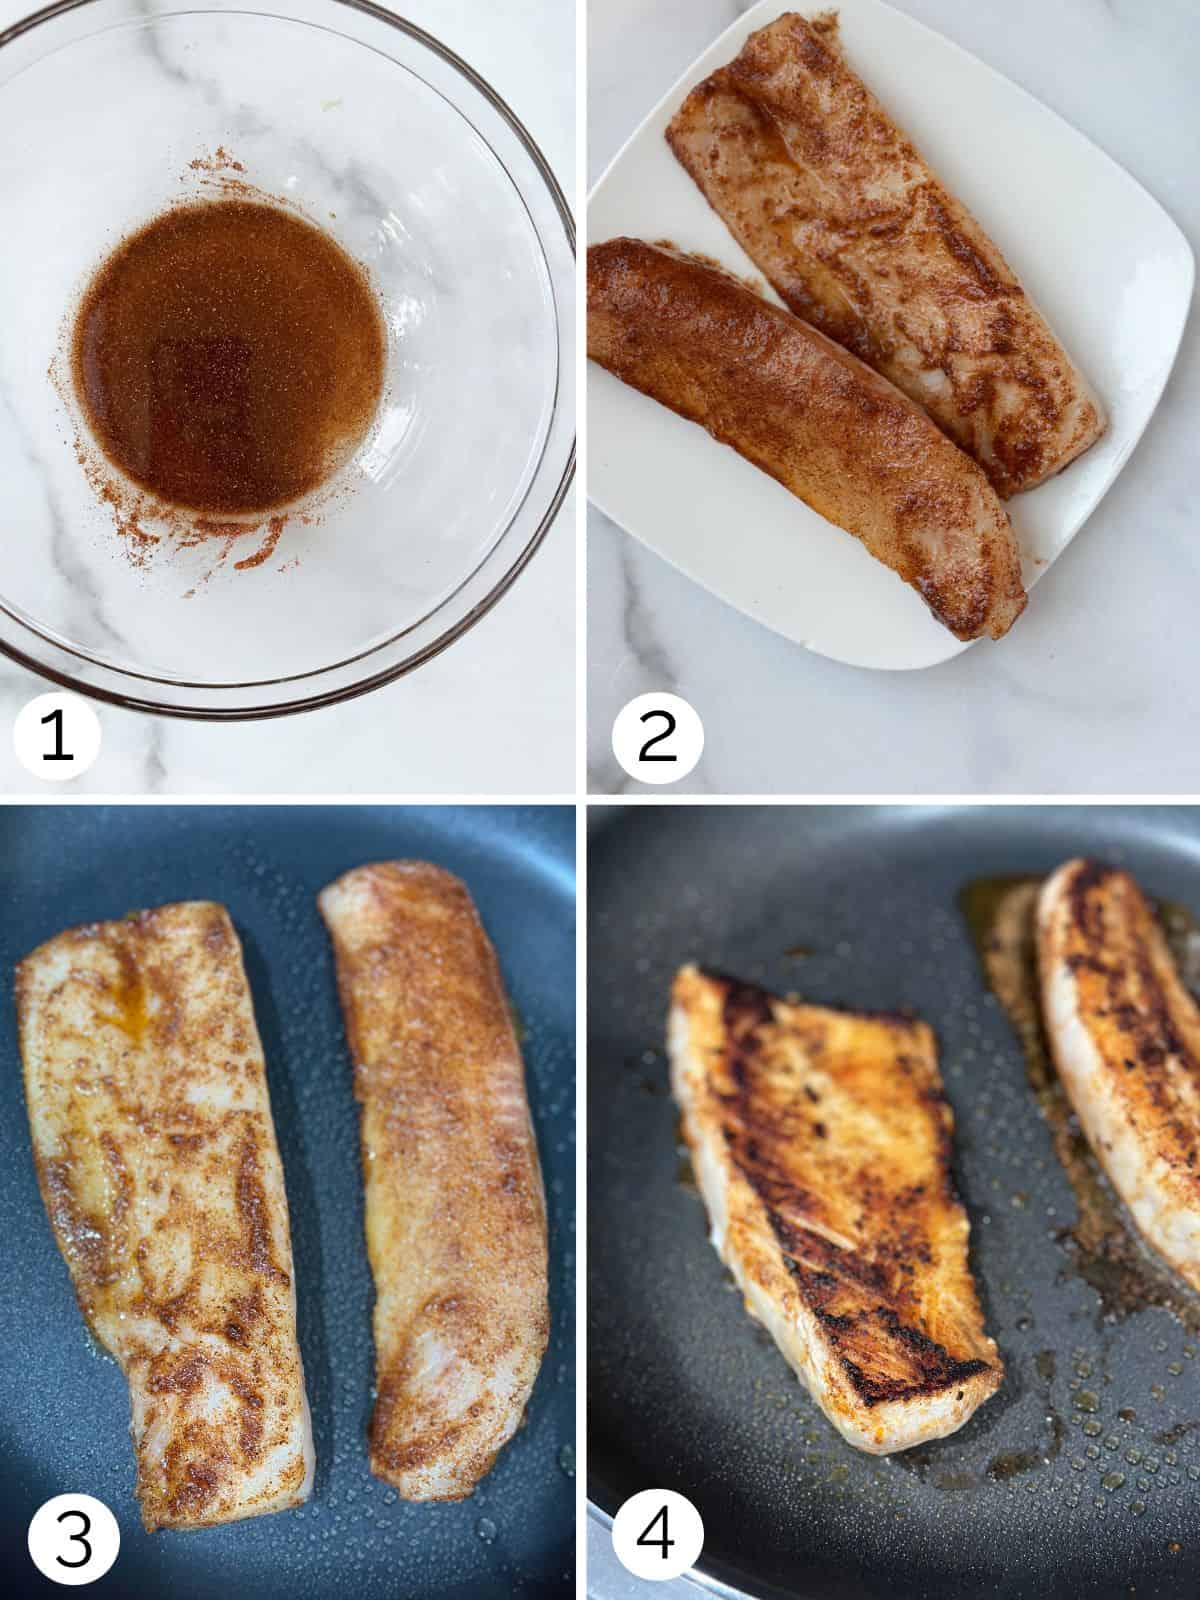 Step by step process for how to sear a cobia fish fillet and making blackening seasoning.